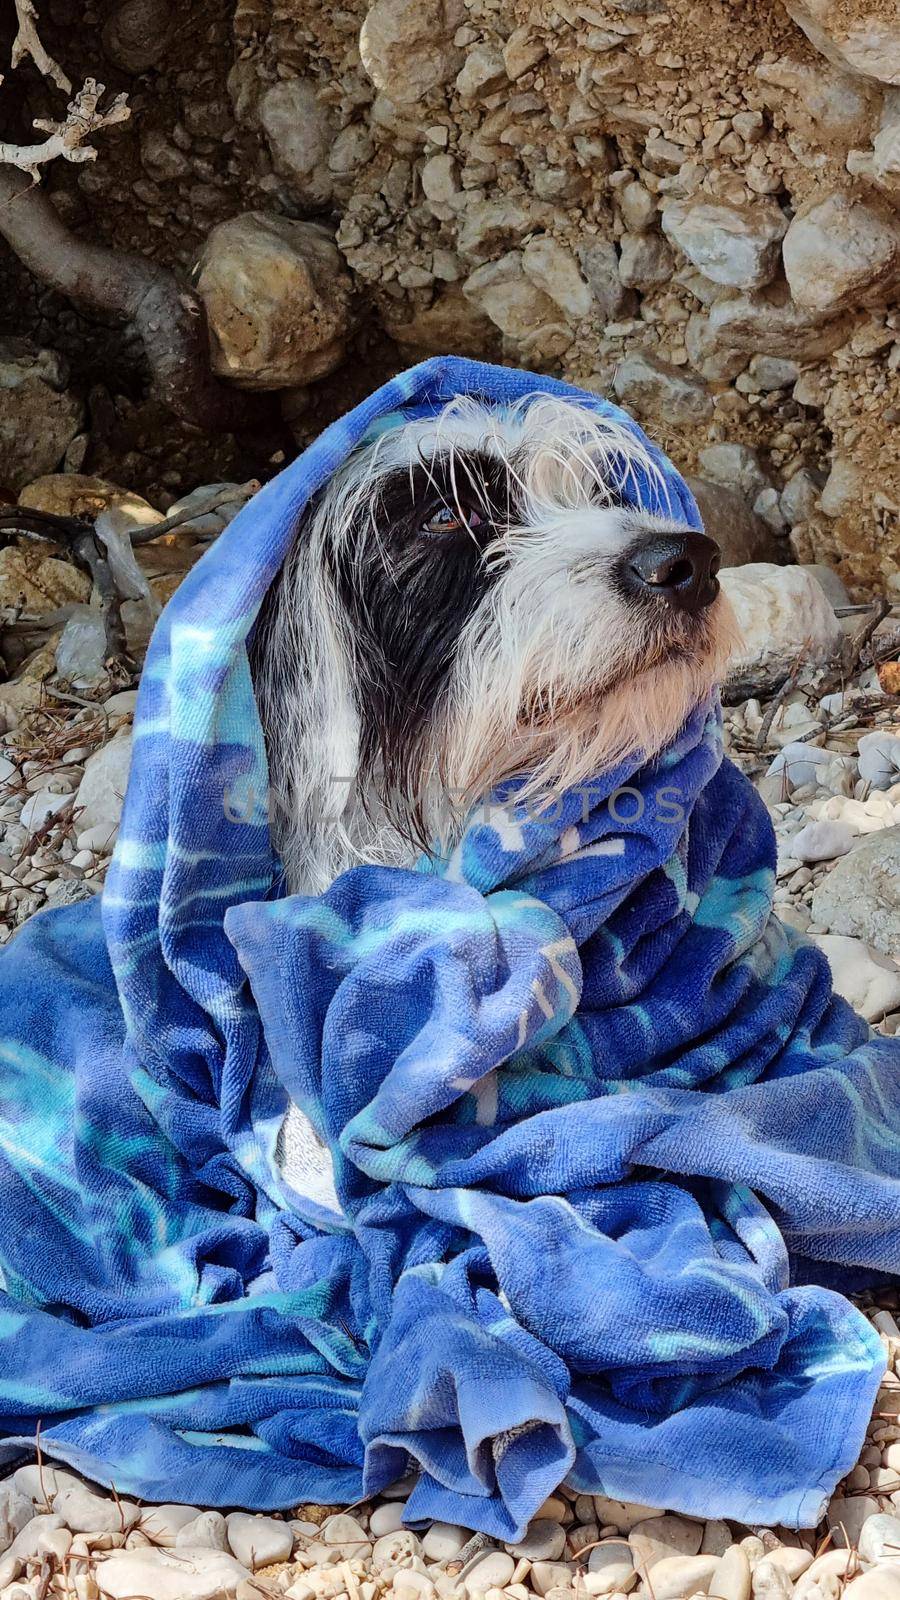 Beach towel wrapped around a dog sitting on the beach by anytka